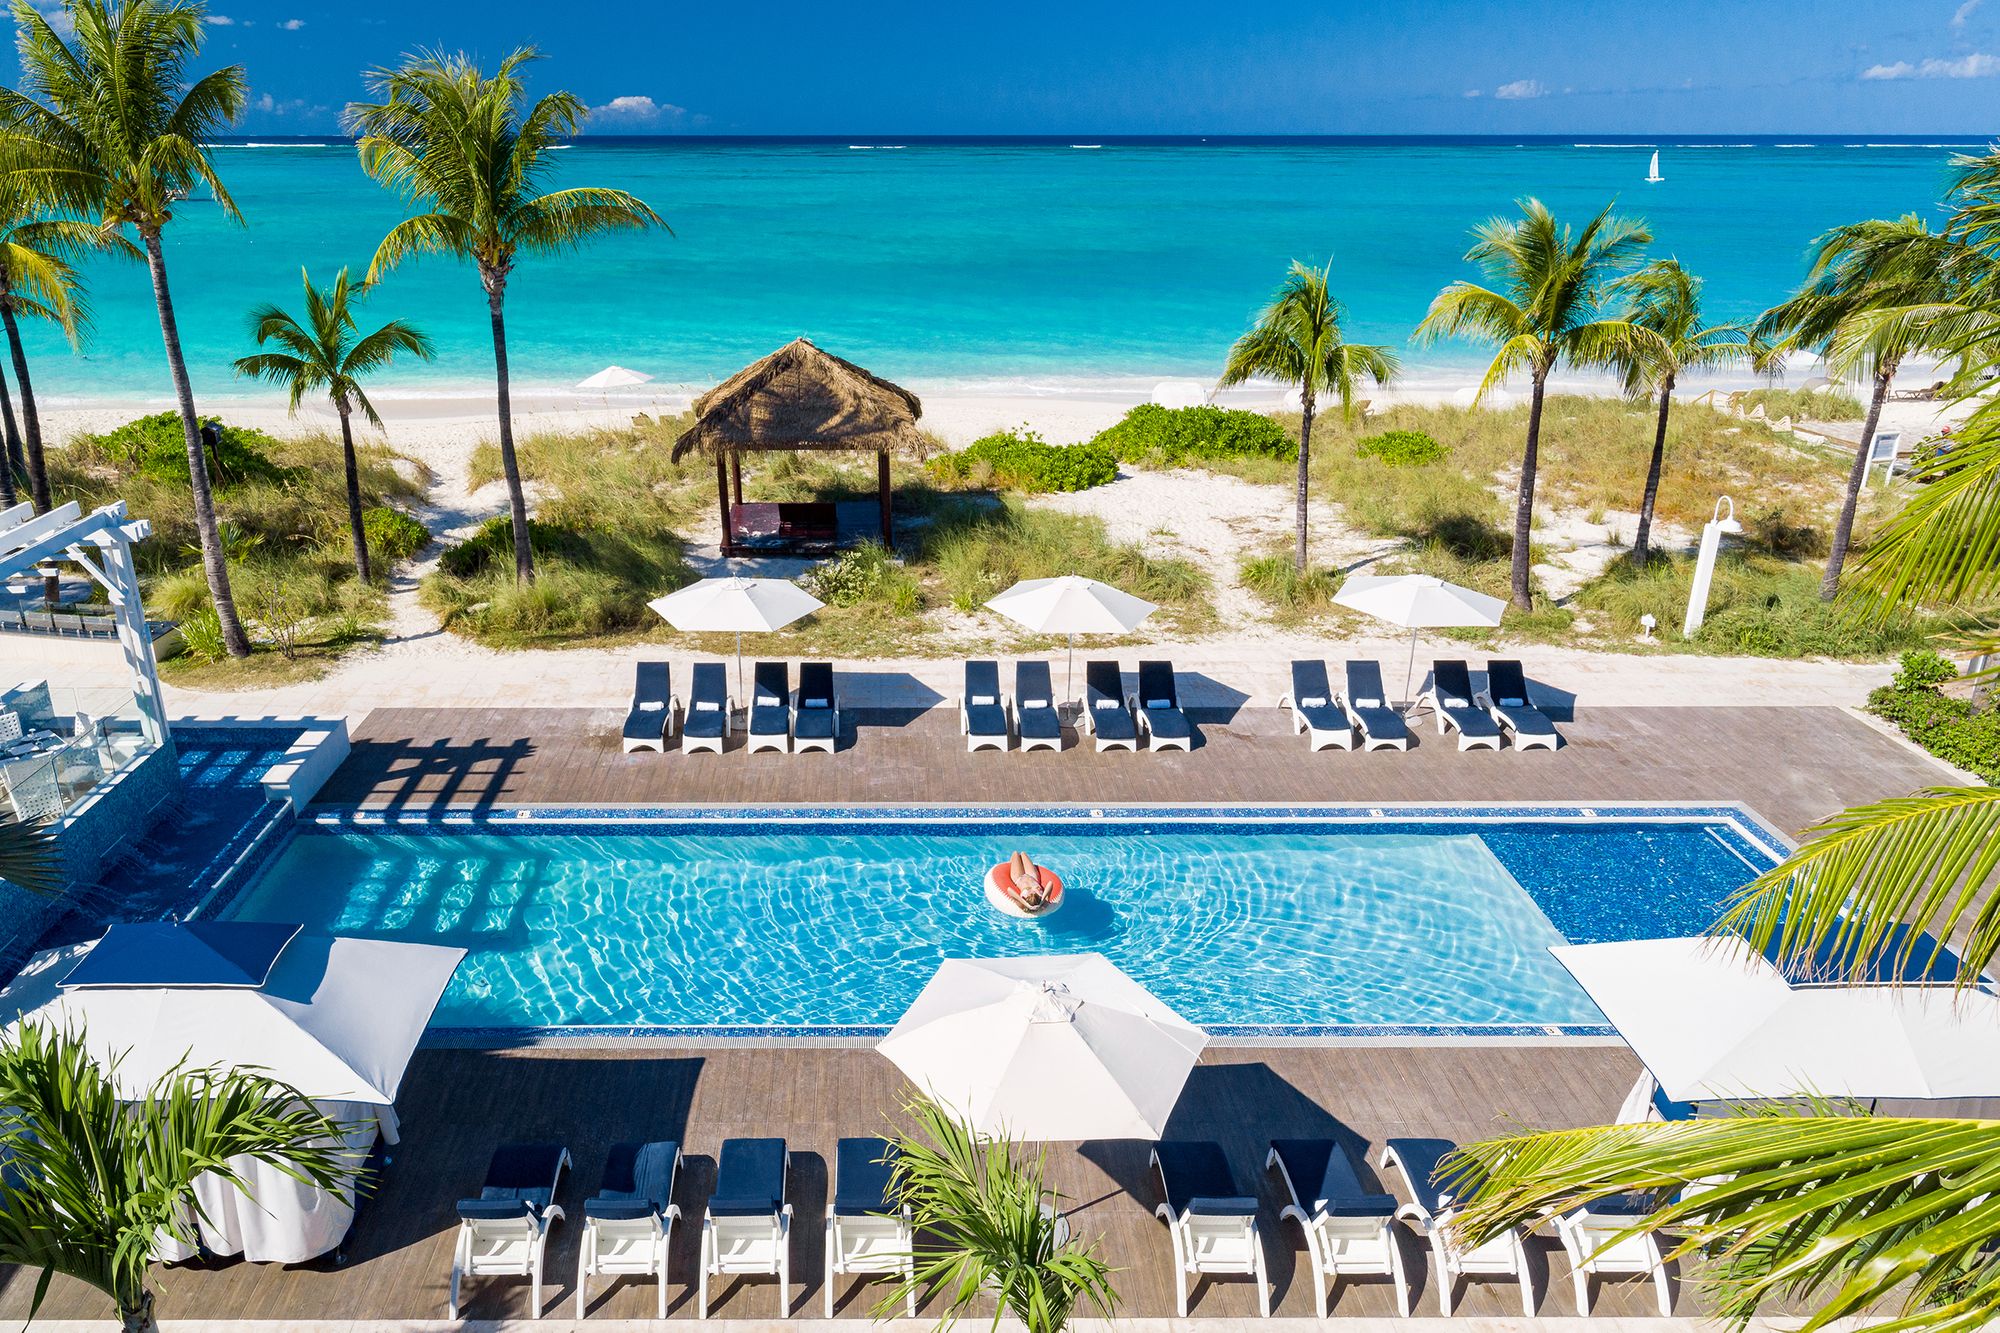 Beaches Turks Caicos Pool Overview